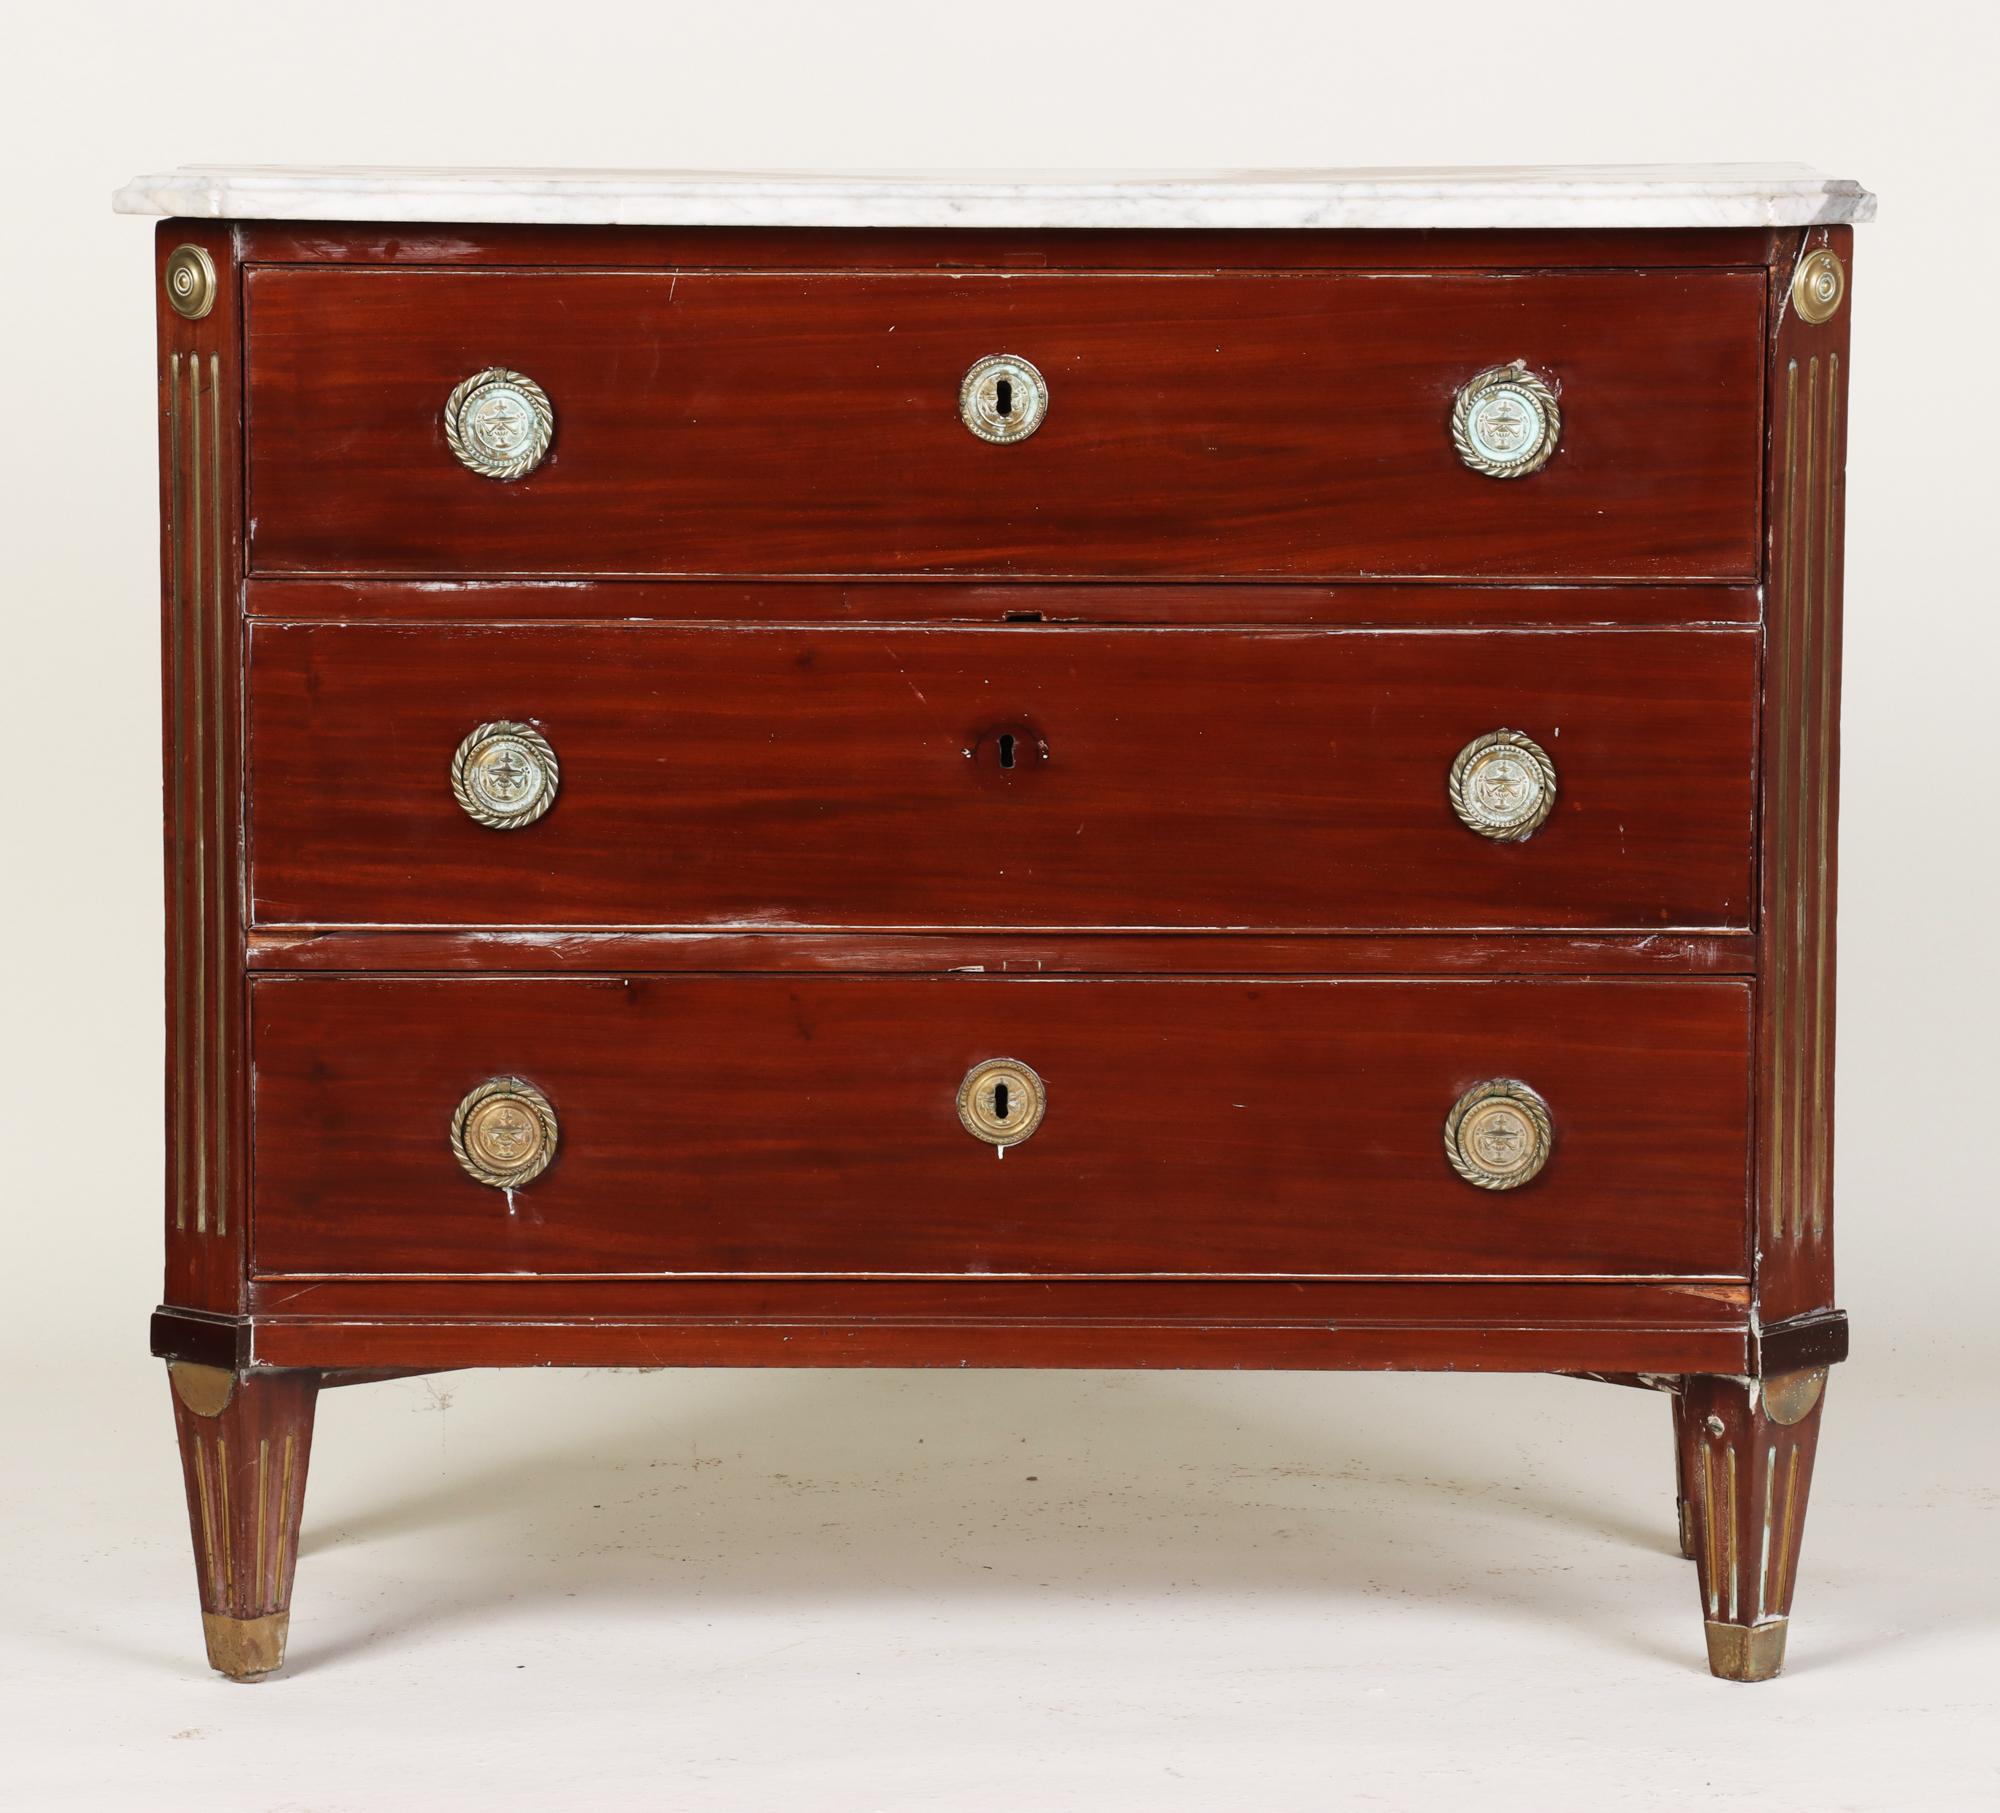 A Russian neoclassical brass mounted mahogany commode, early nineteenth century. Featuring a marble top with outset square corners above a case fitted with three drawers and ending in tapering square feet.